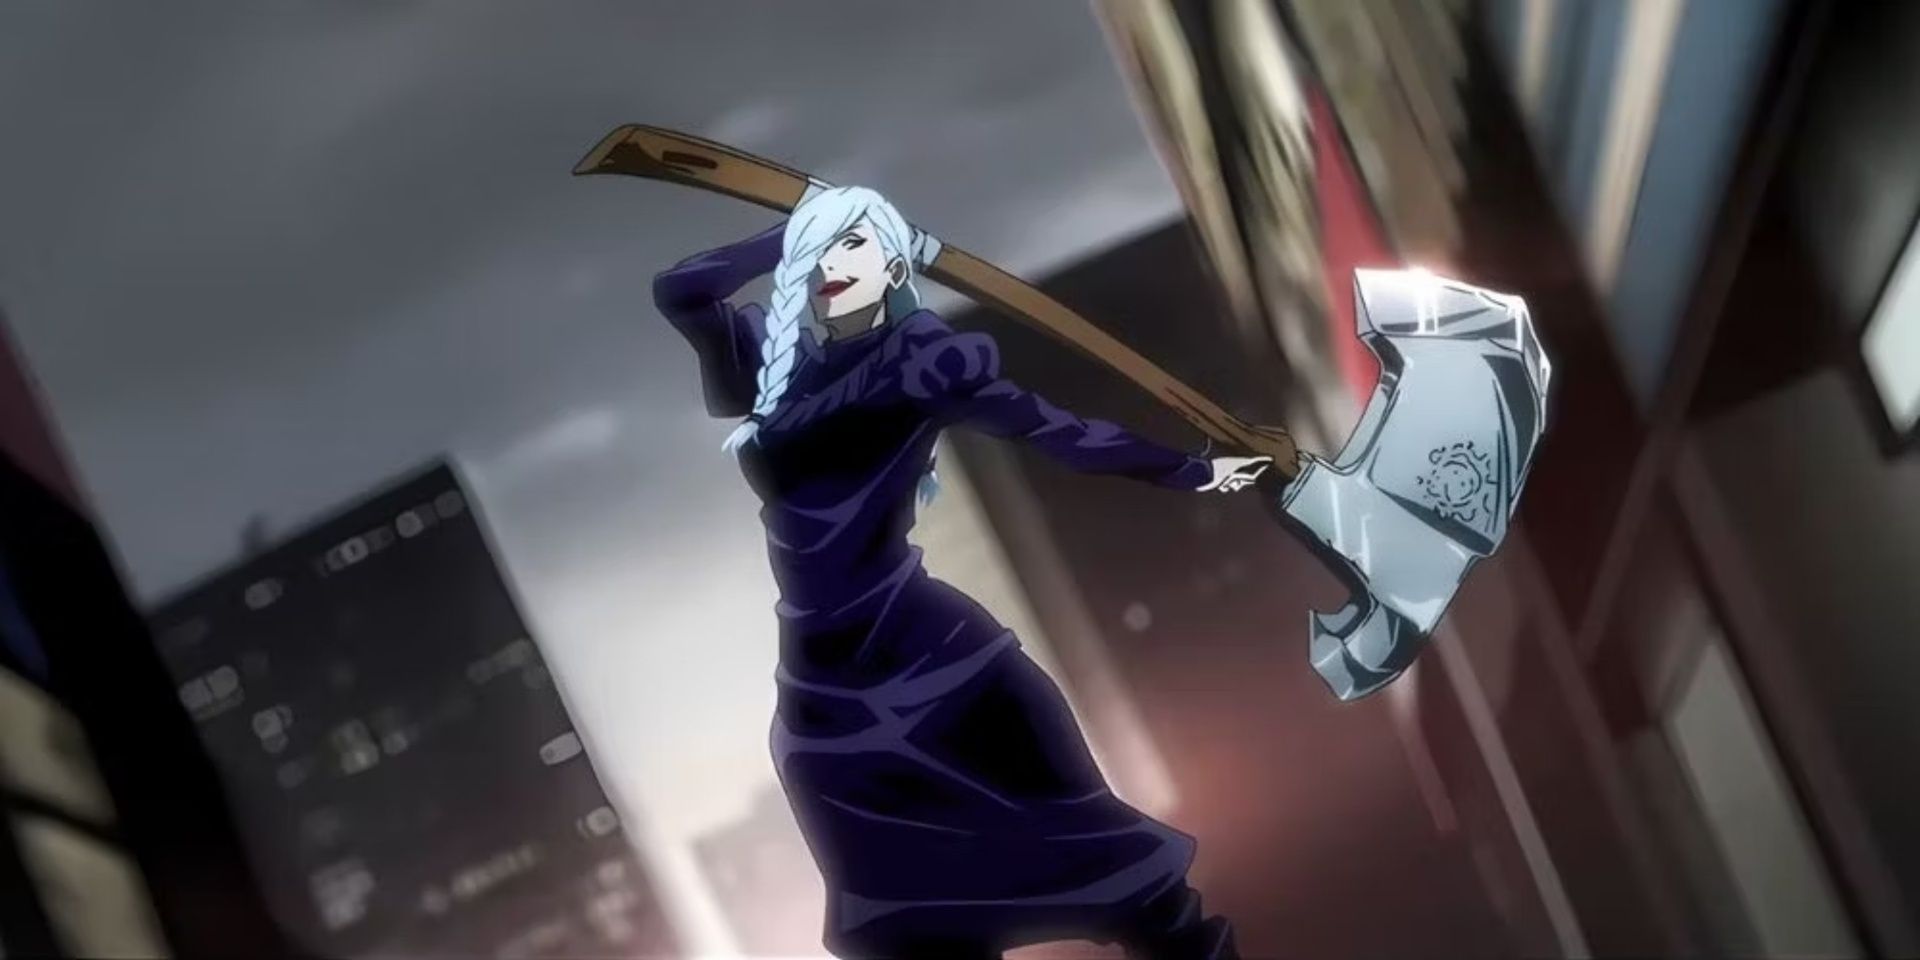 Mei Mei stands with her Cursed Tool in the air in Jujutsu Kaisen